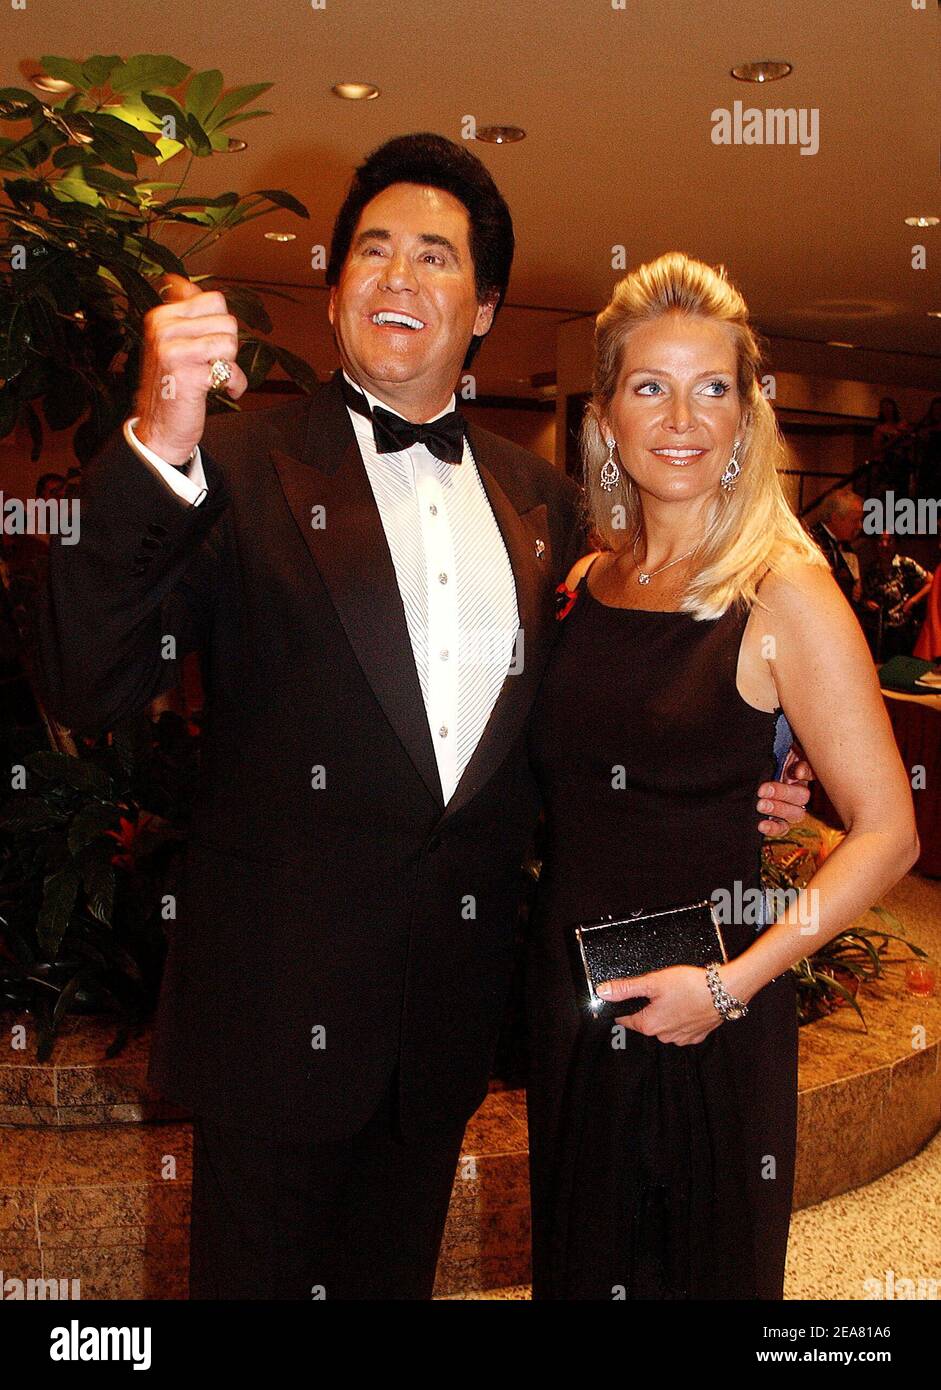 Washington DC  Mai 01 2004. Politicians and celebrities attends the 2004 White House Correspondents Dinner in Washington . (Pictured: Wayne Newton) Photo by Olivier Douliery/ABACA Stock Photo